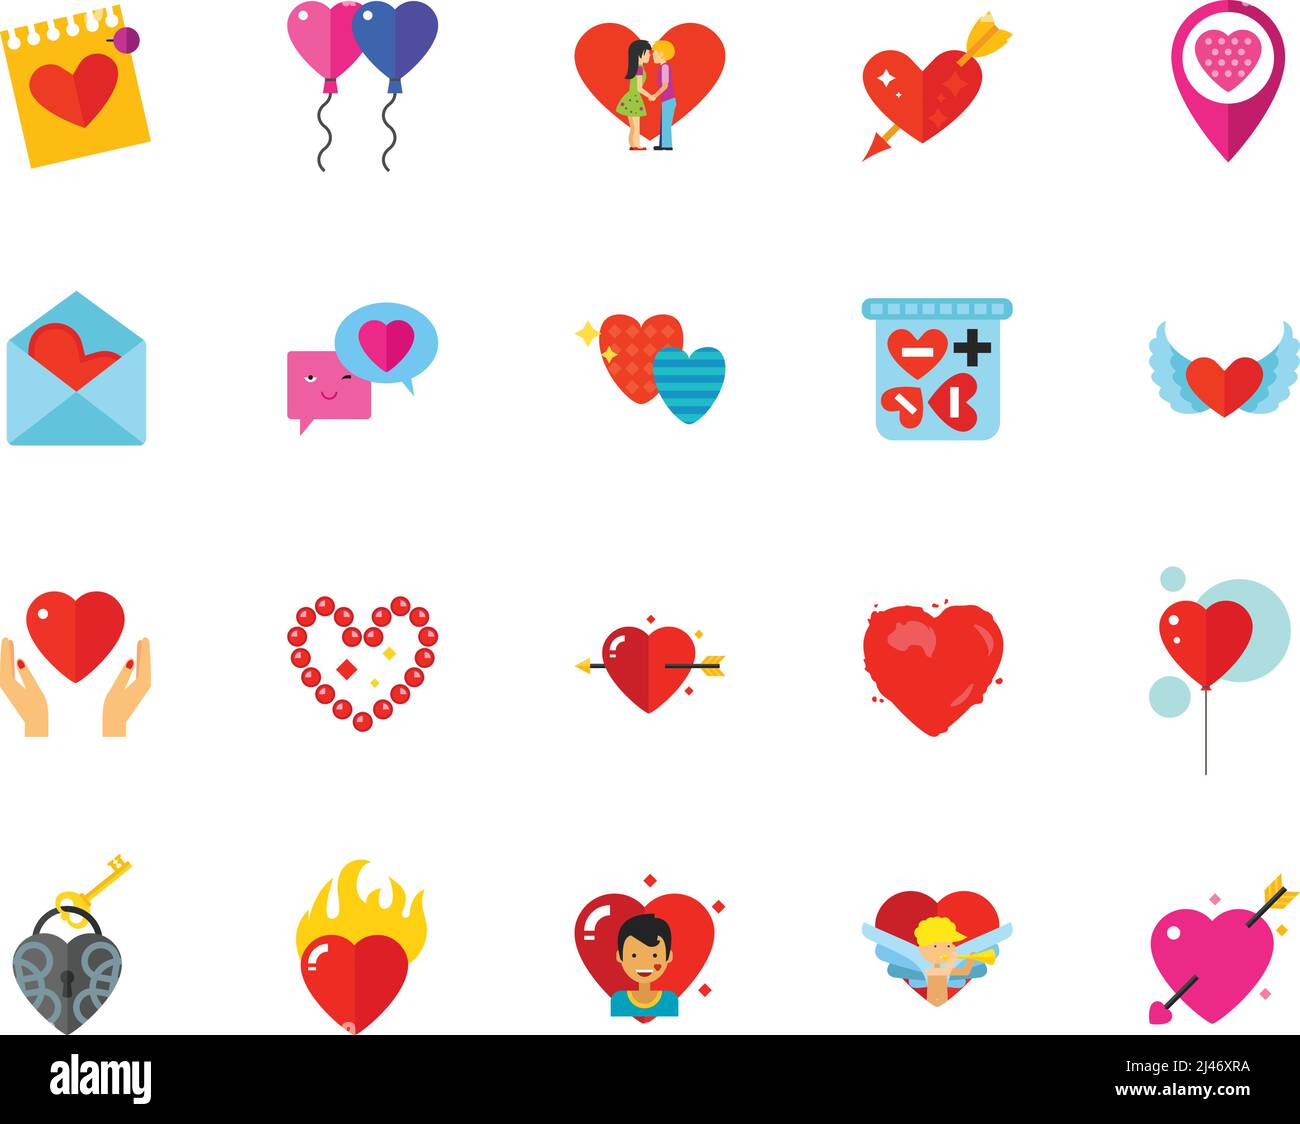 St. Valentine Day icon set. Can be used for topics like holiday, love, passion, affection, relationships Stock Vector